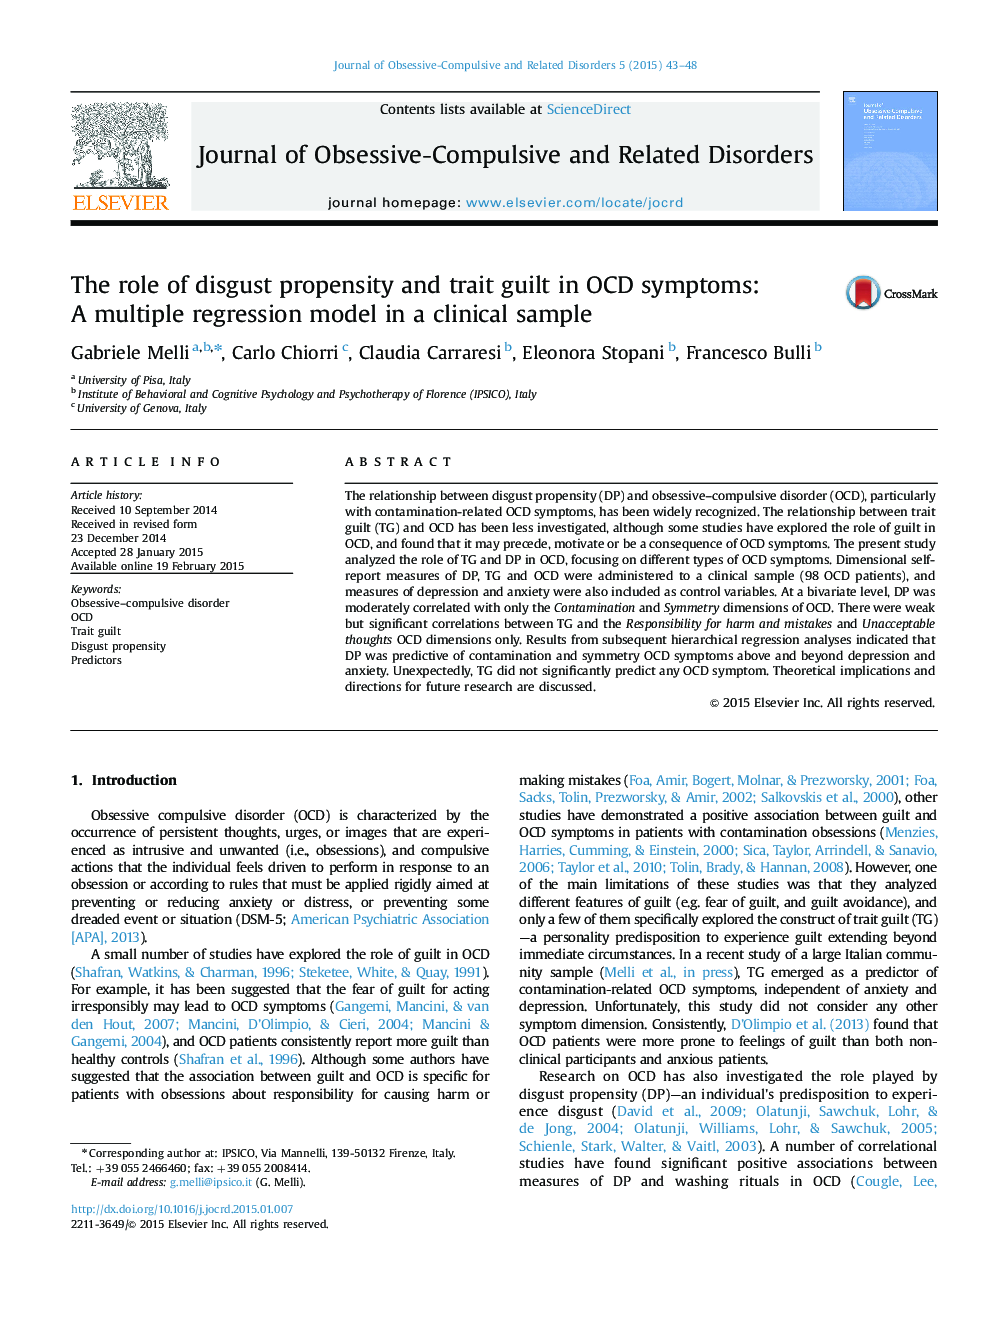 The role of disgust propensity and trait guilt in OCD symptoms: A multiple regression model in a clinical sample